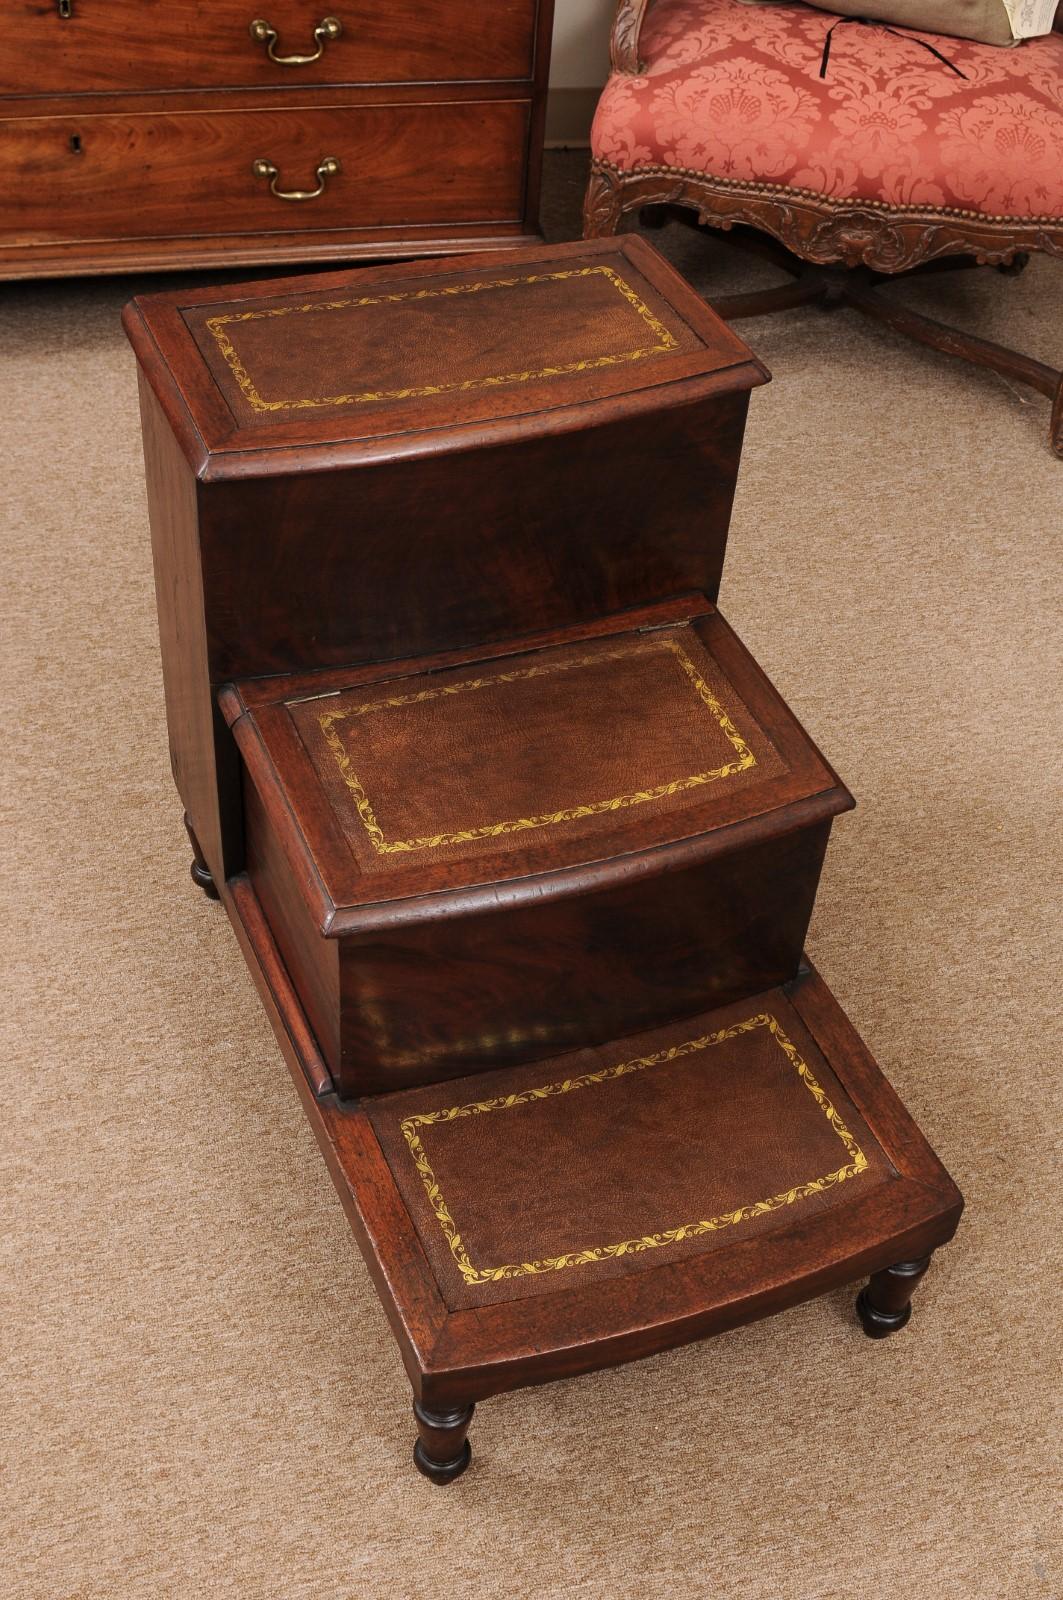  19th Century English Regency Library Steps in Mahogany with Embossed Leather For Sale 5